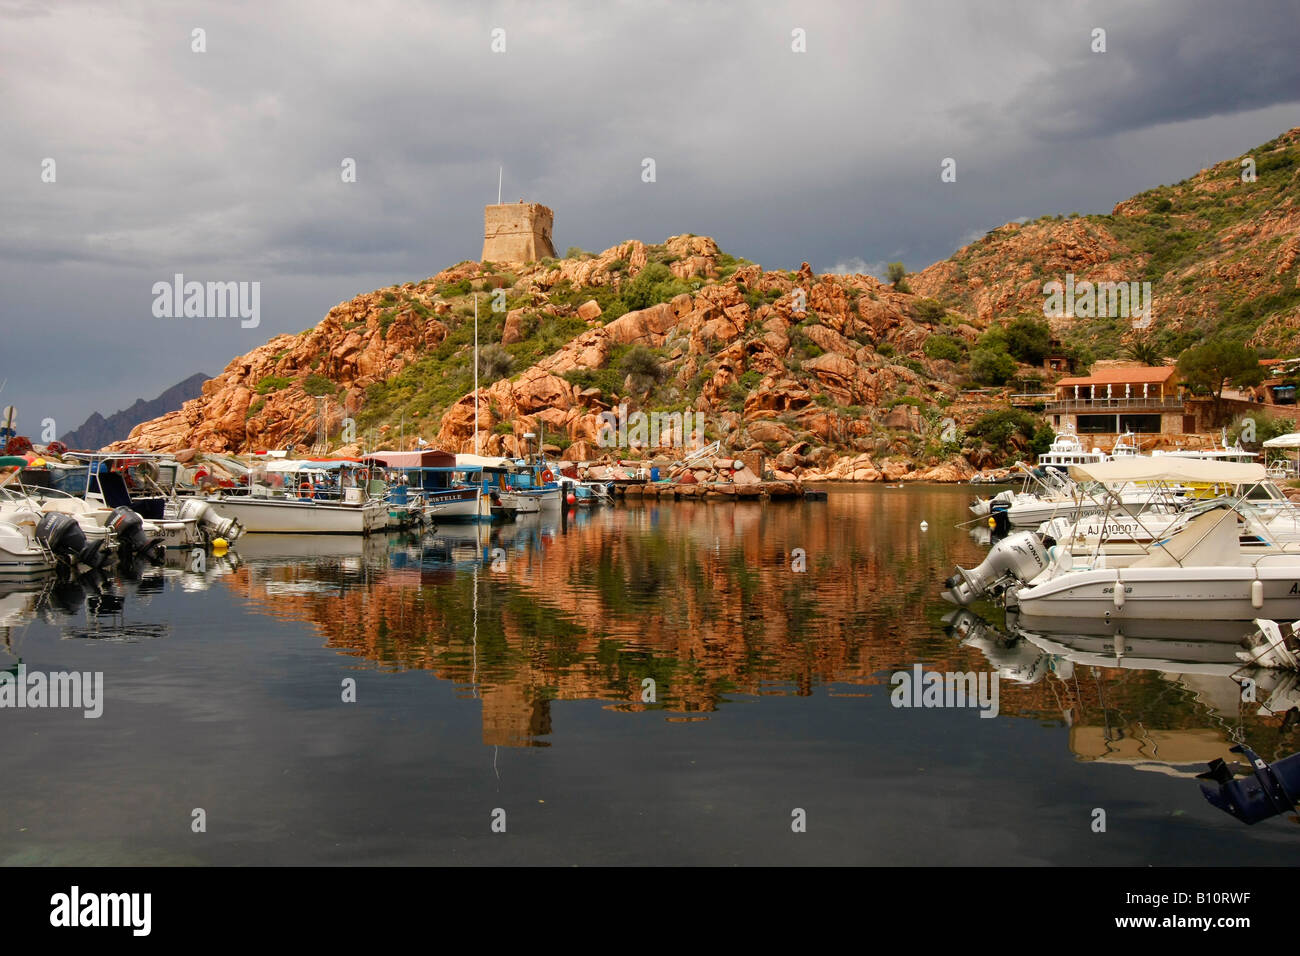 Genoese watch tower and marina in Porto Marina Corsica France Stock Photo